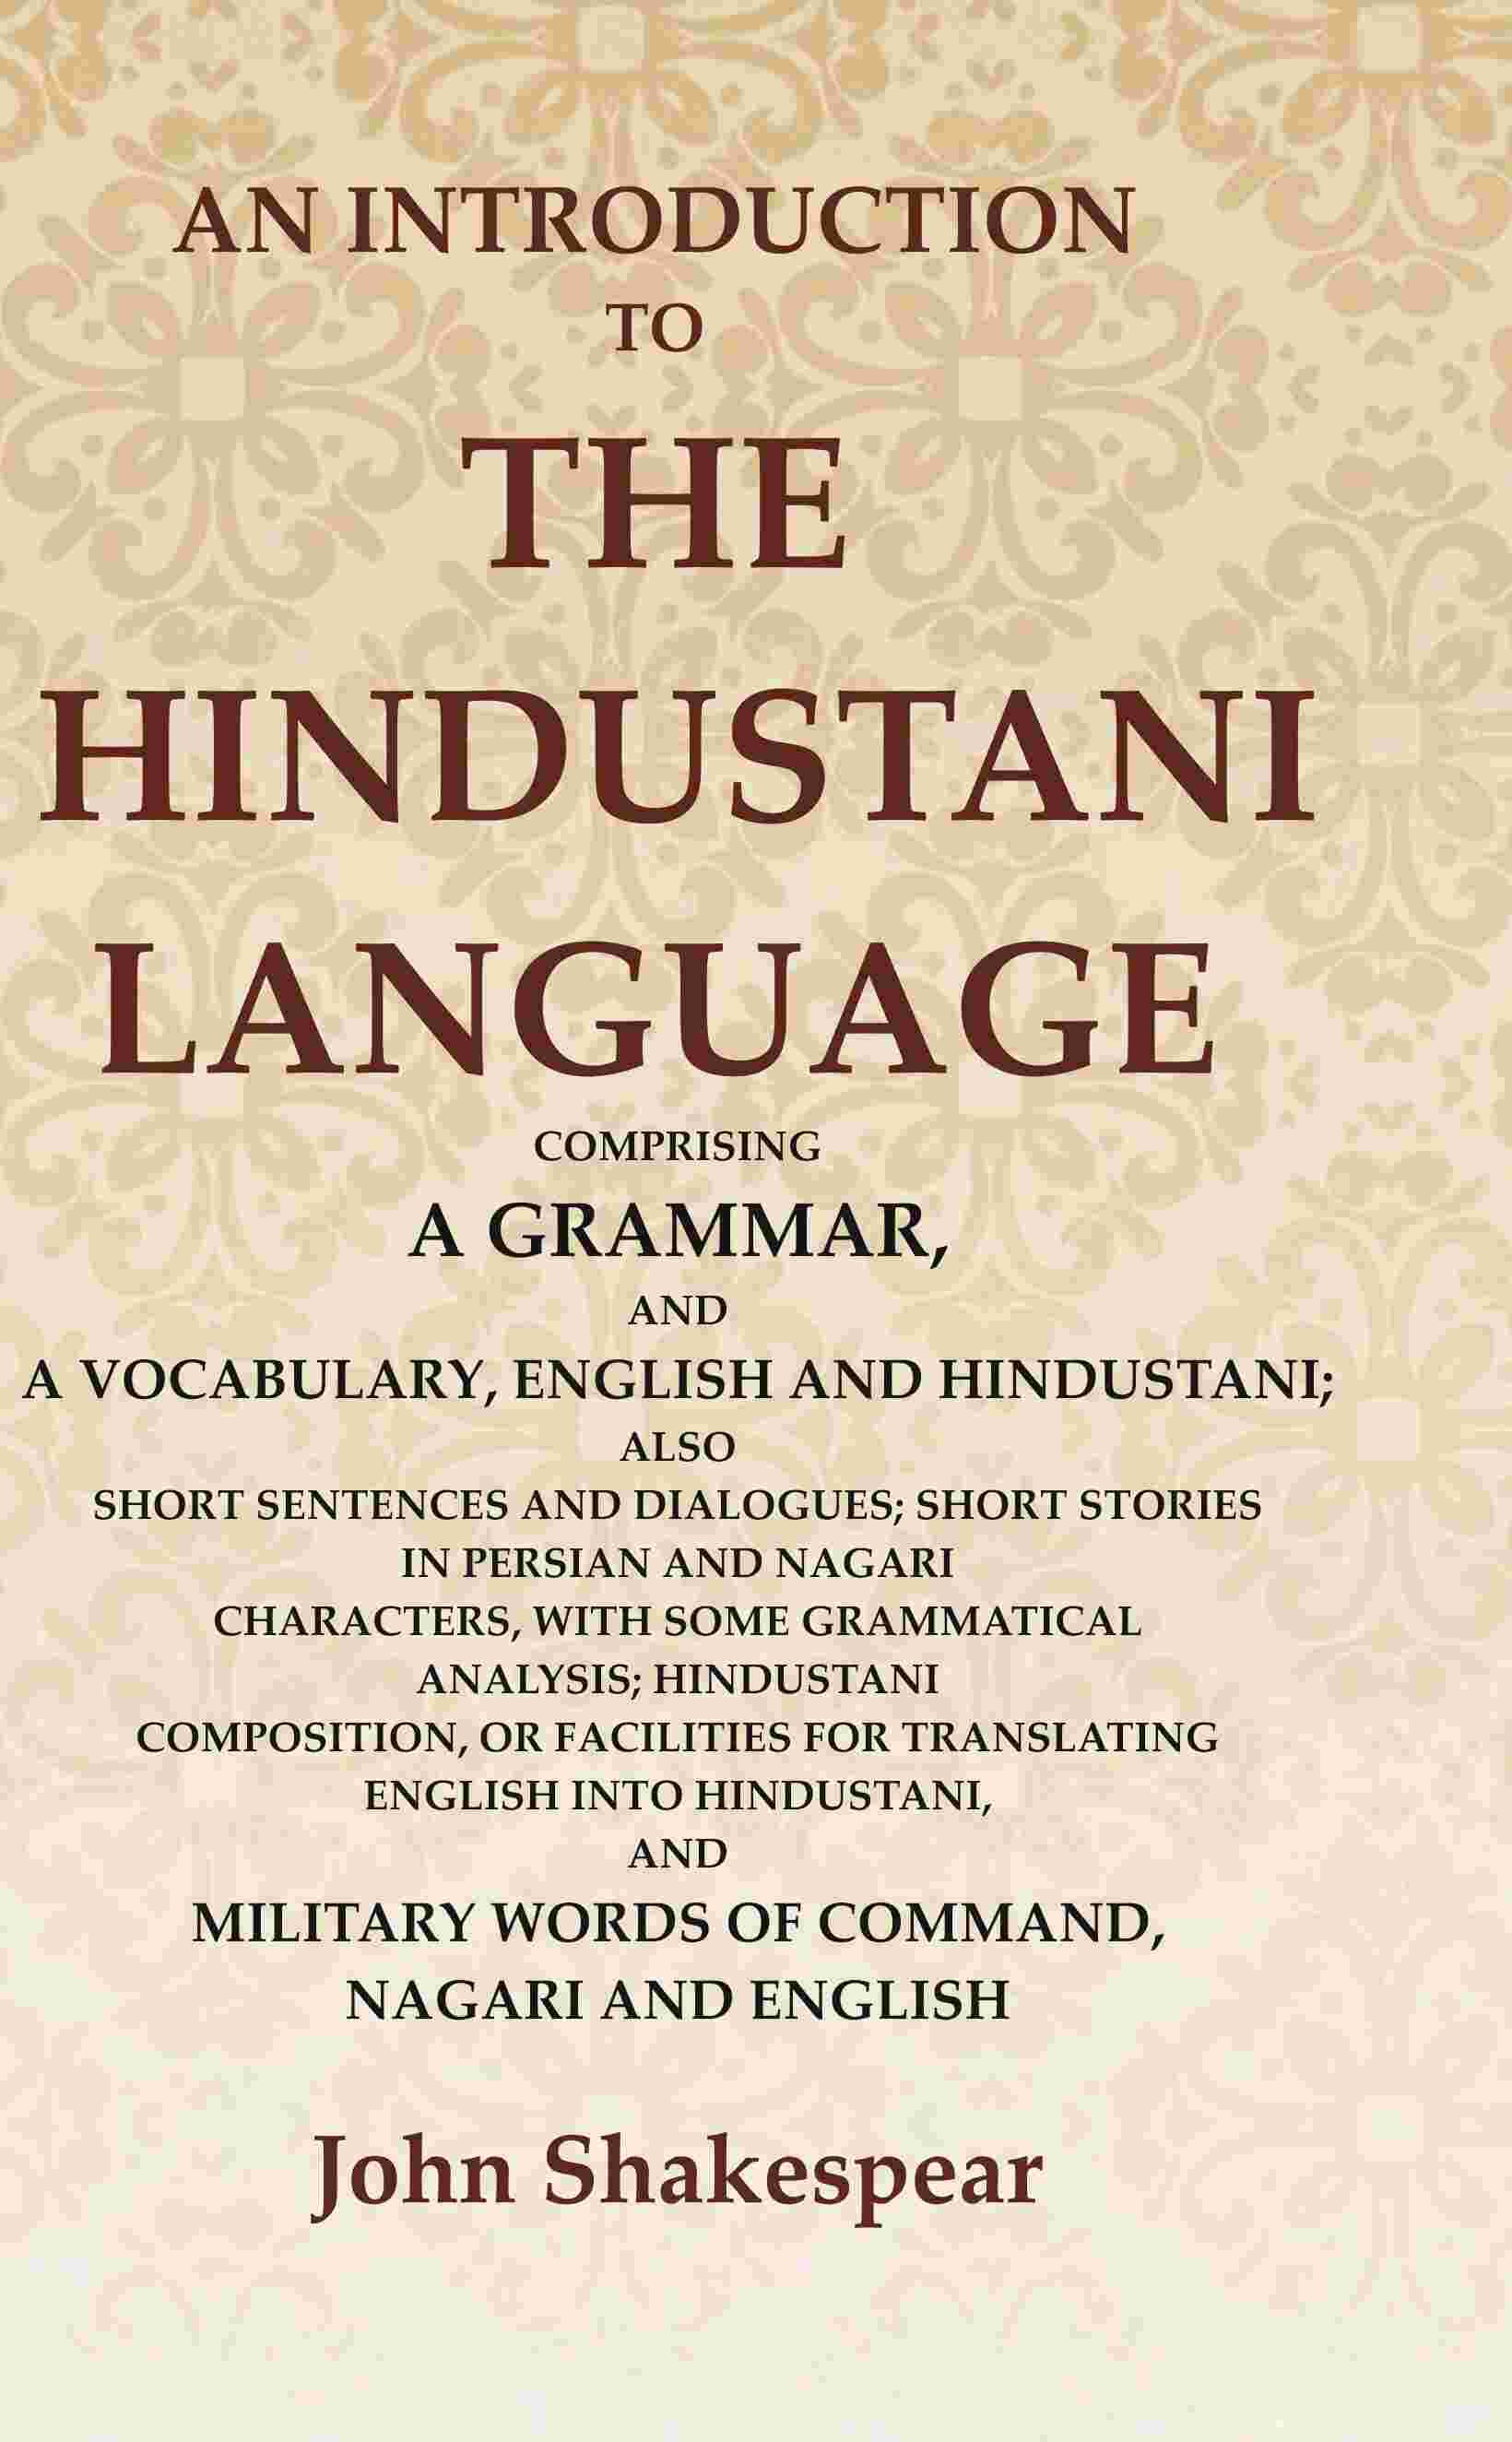 An Introduction to the Hindustani Language: Comprising a Grammar, and a Vocabulary, English and Hindustani; Also Short Sentences and Dialogues; Short Stories in Persian and Nagari Characters, with some Grammatical Analysis; Hindustani Composition, or Faci